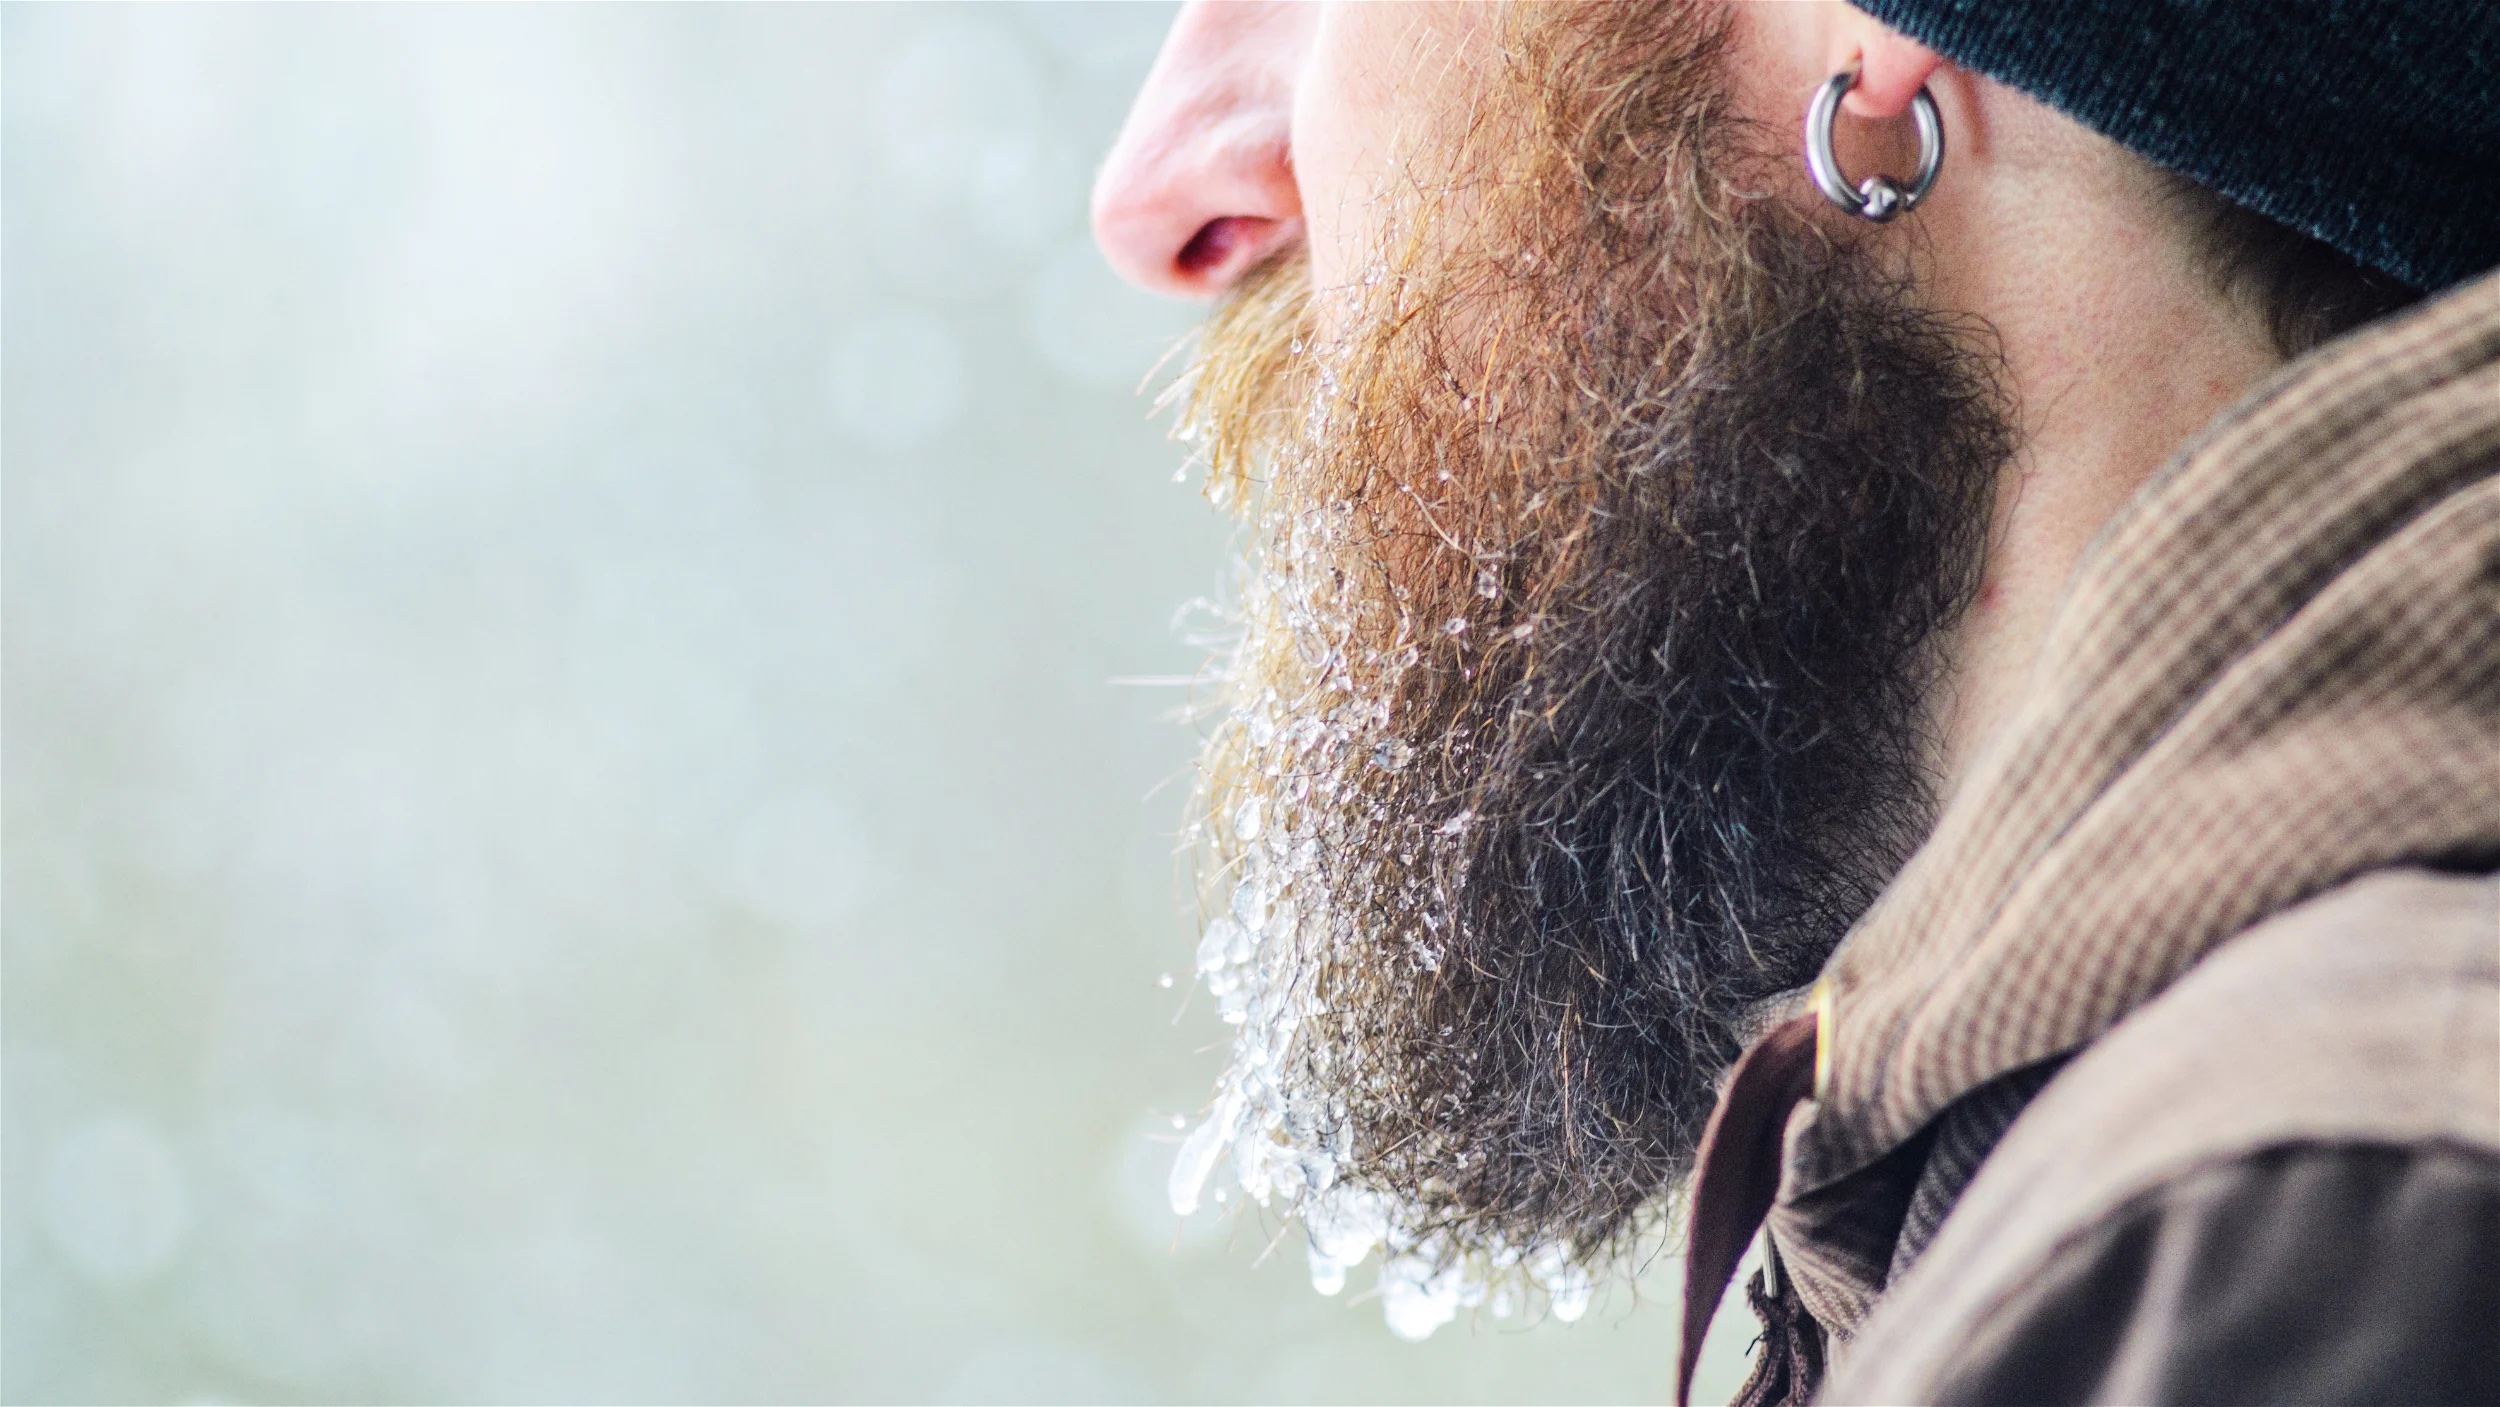 Winter Beard Care Tips to Help Survive the Cold Freeze